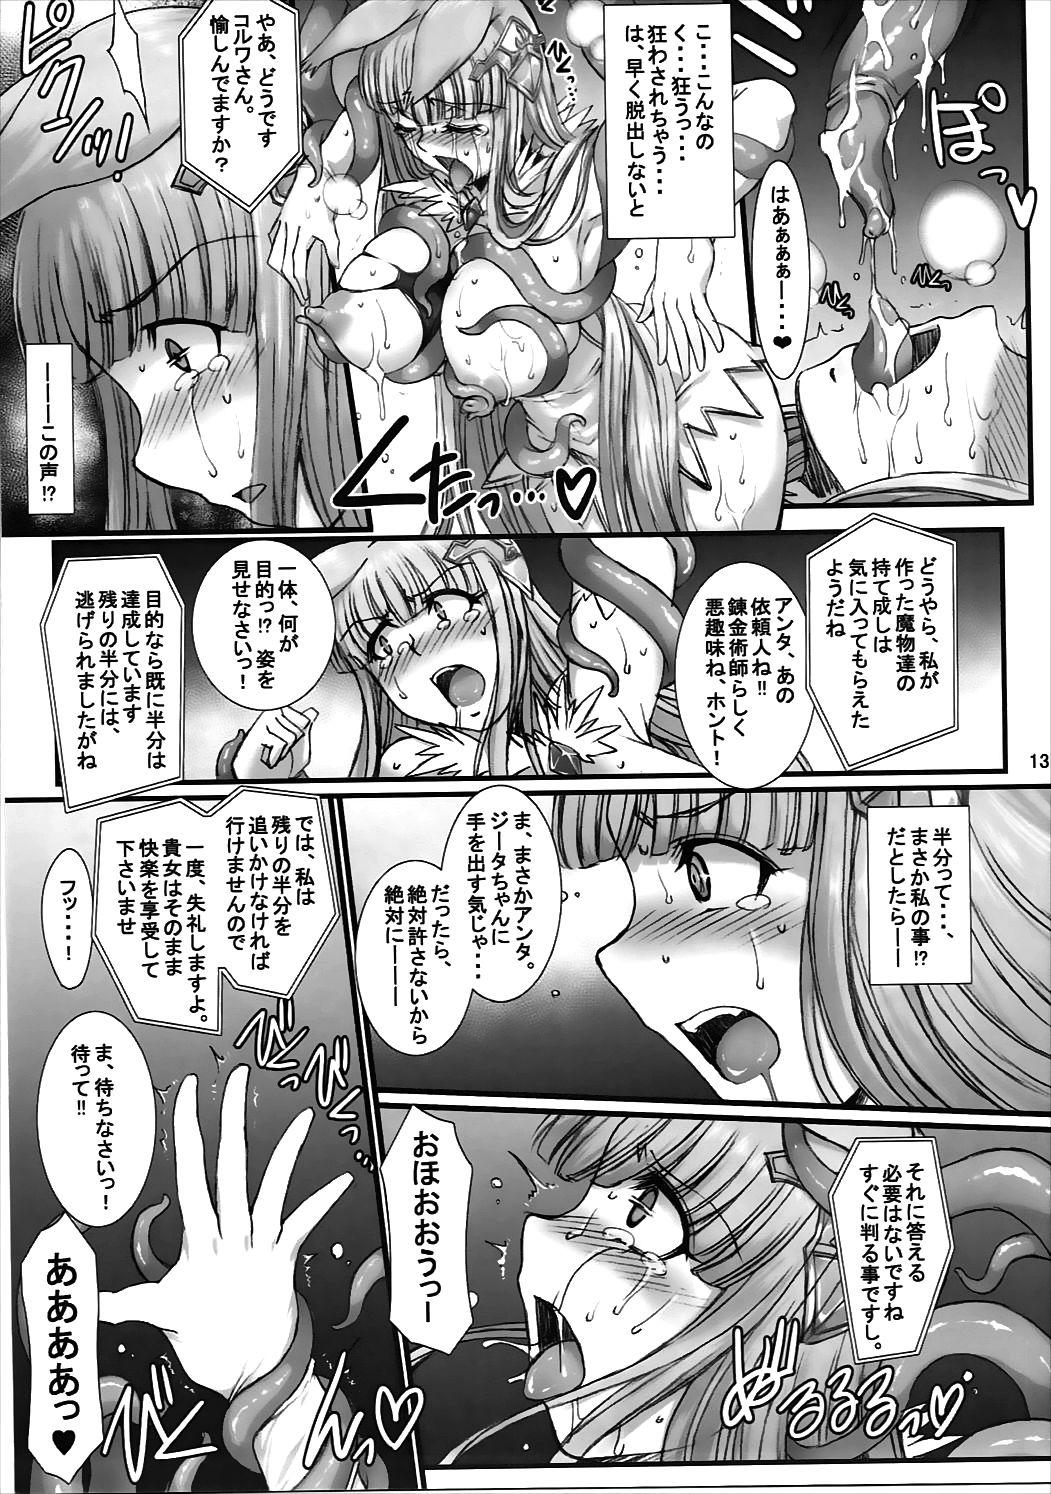 Hardsex BAD END to Iu Na no HAPPY END - Granblue fantasy Mmf - Page 12